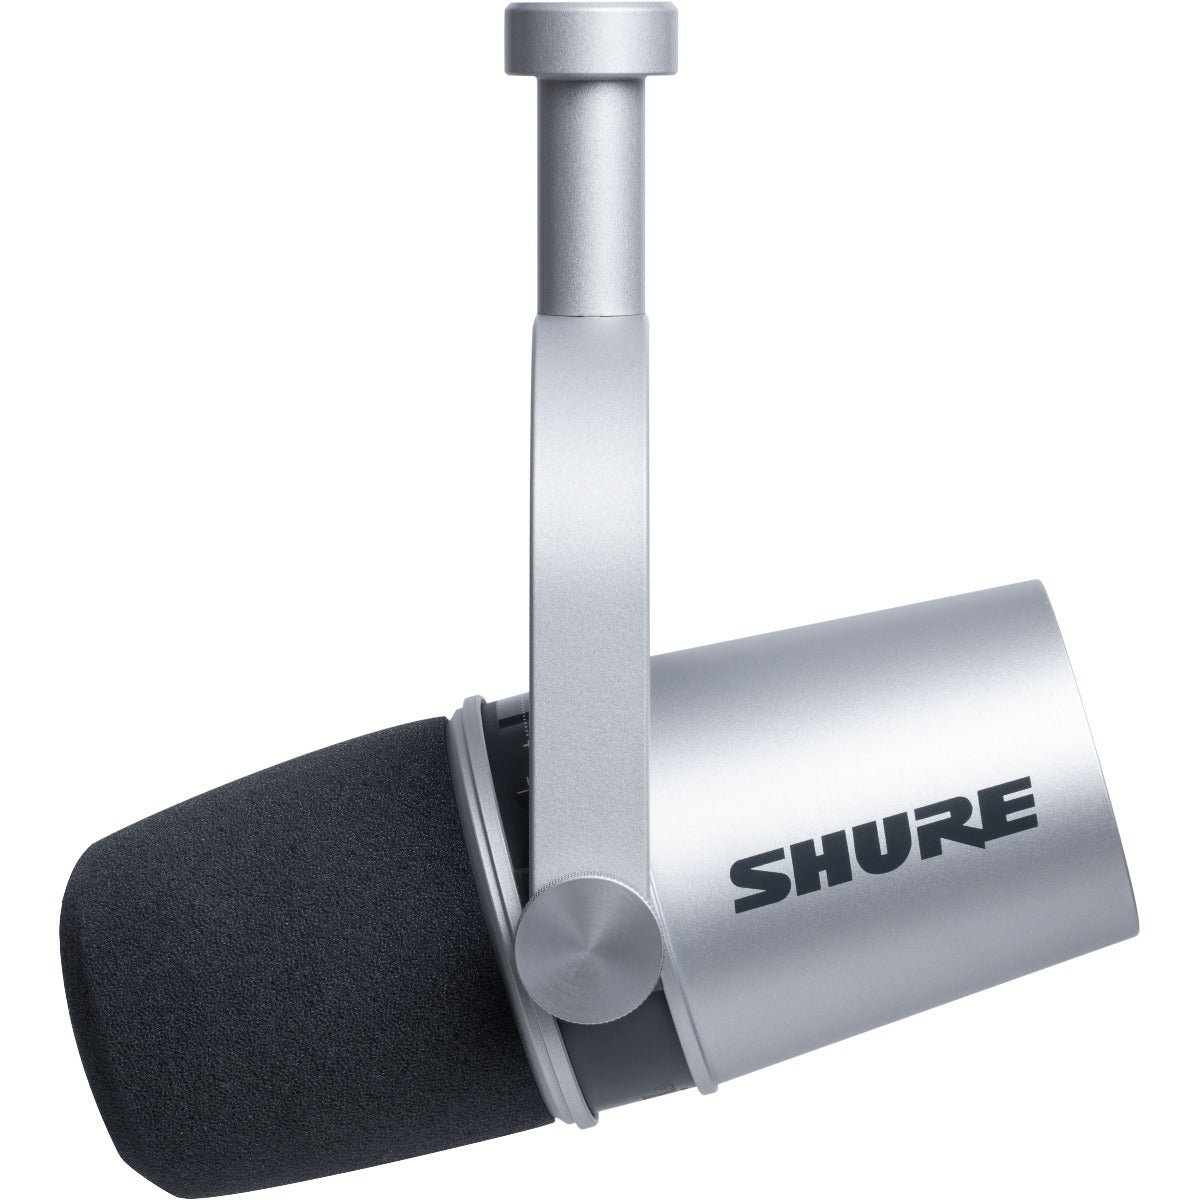 3/4 view of Shure MV7 Podcast Microphone - Silver with integrated yoke in boom position showing front, top and right side